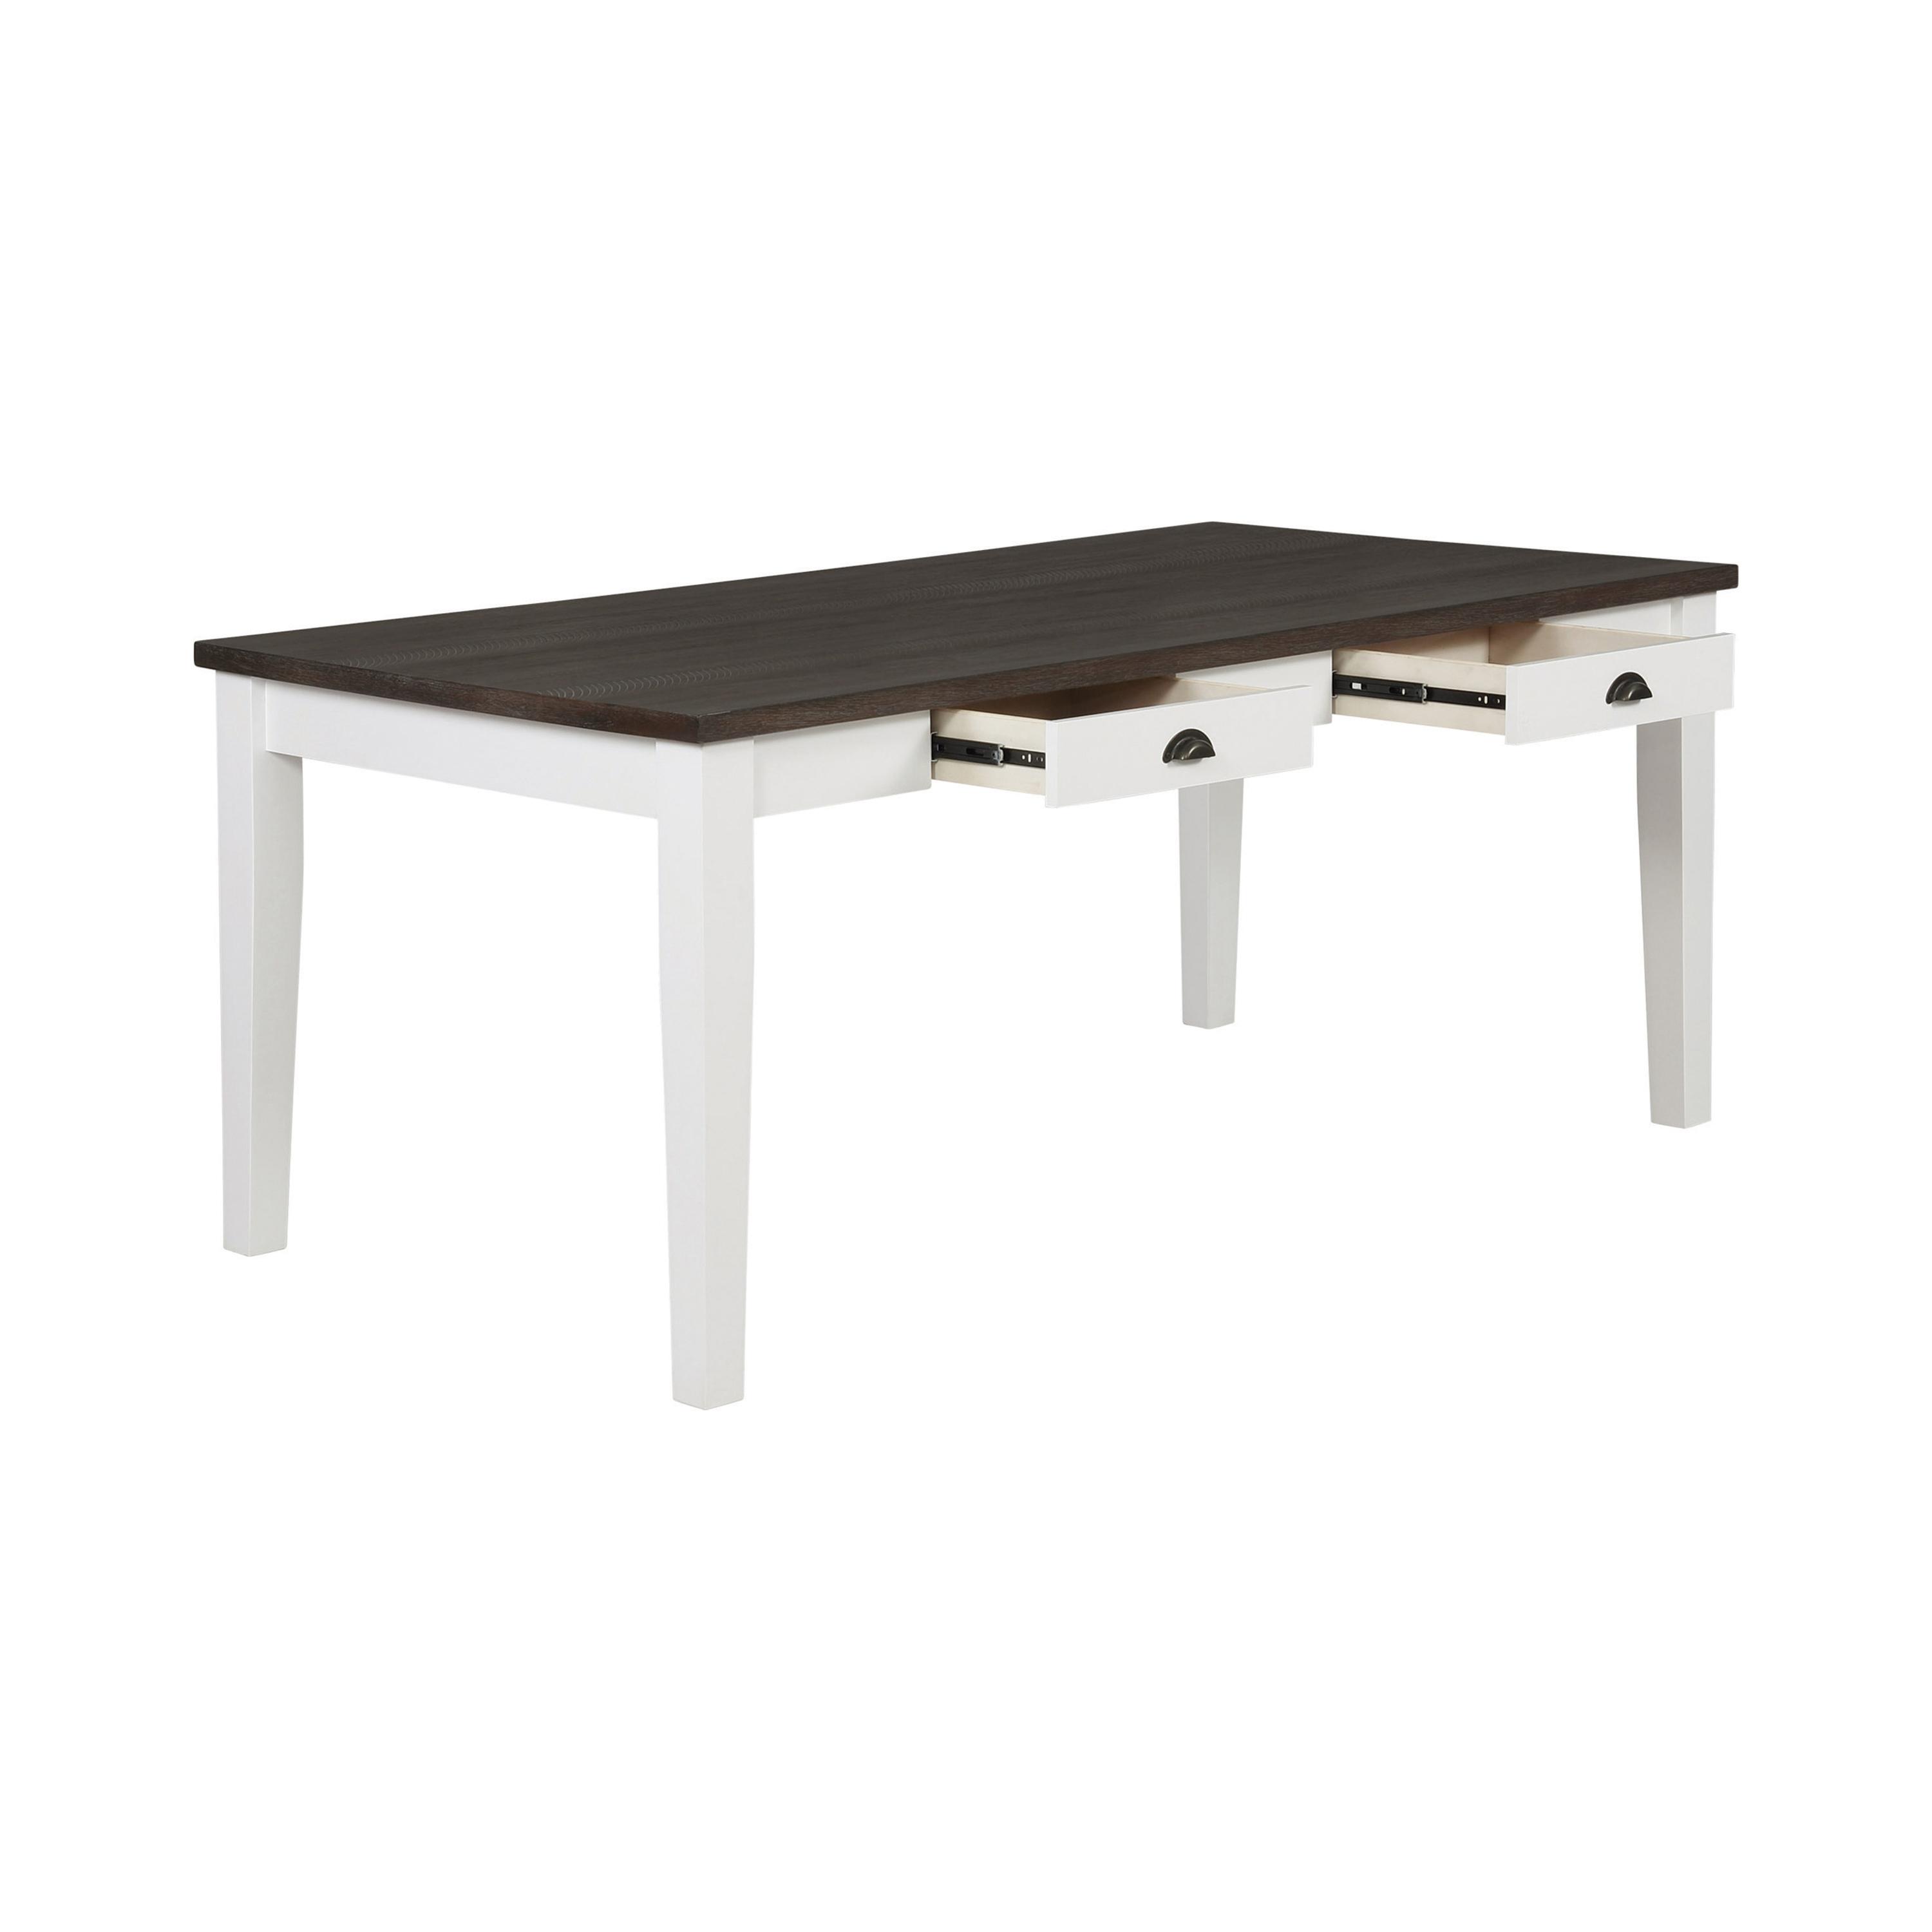 Cottage Dining Table 109541 Kingman 109541 in Espresso, White 